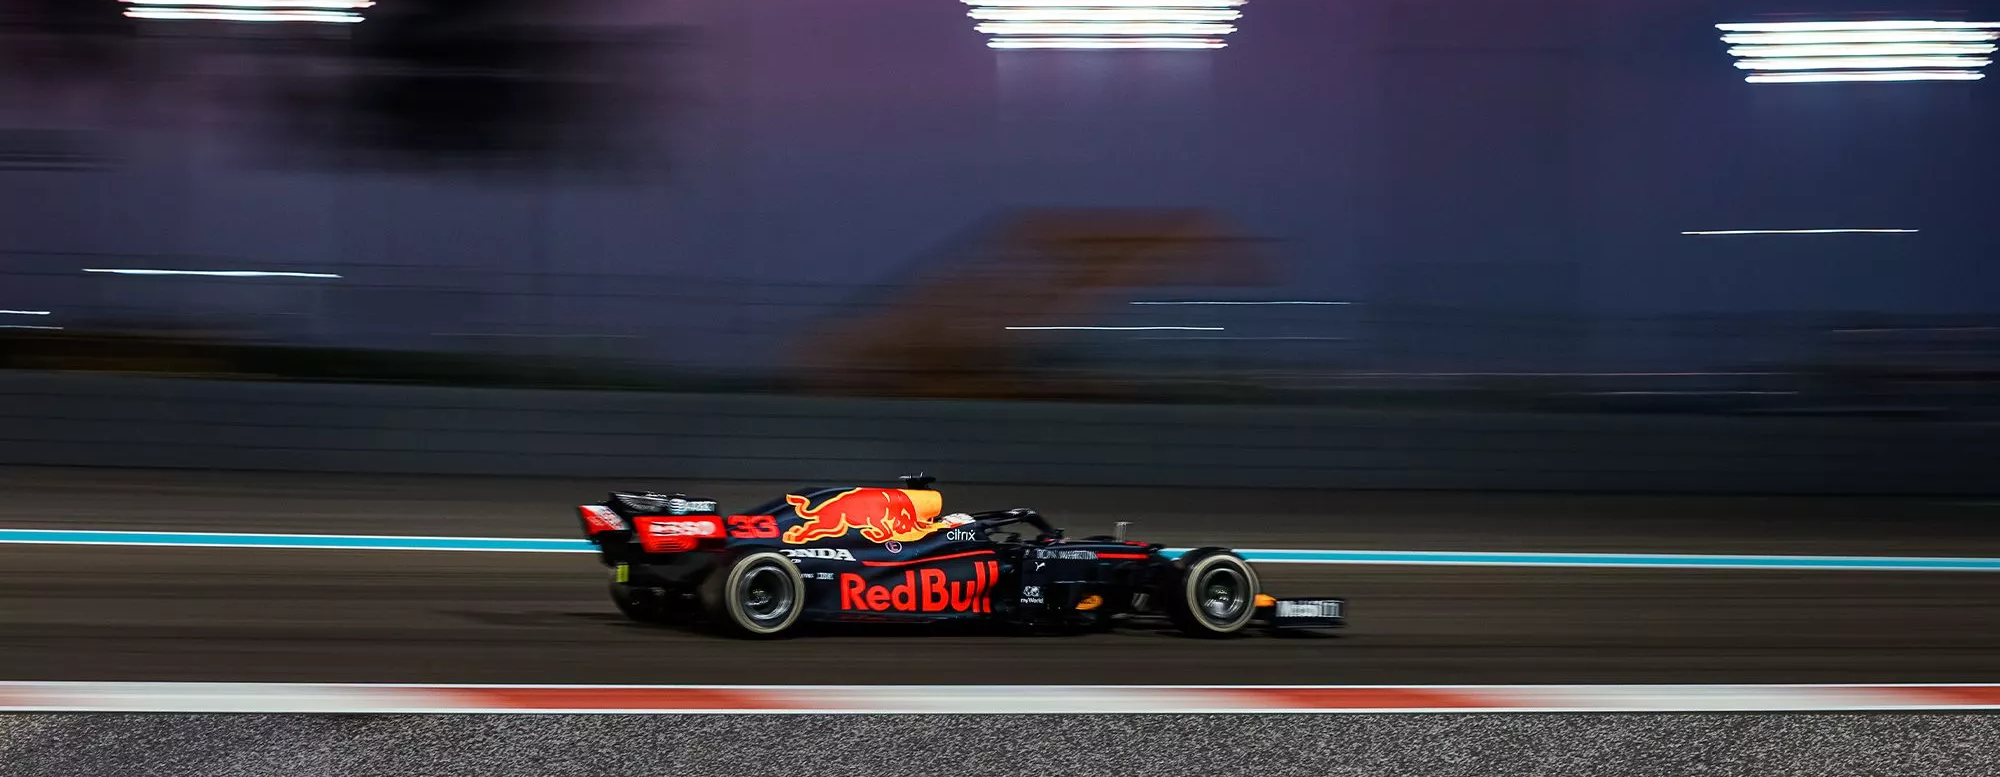 see abu dhabi grand prix up close with the best tickets money can buy